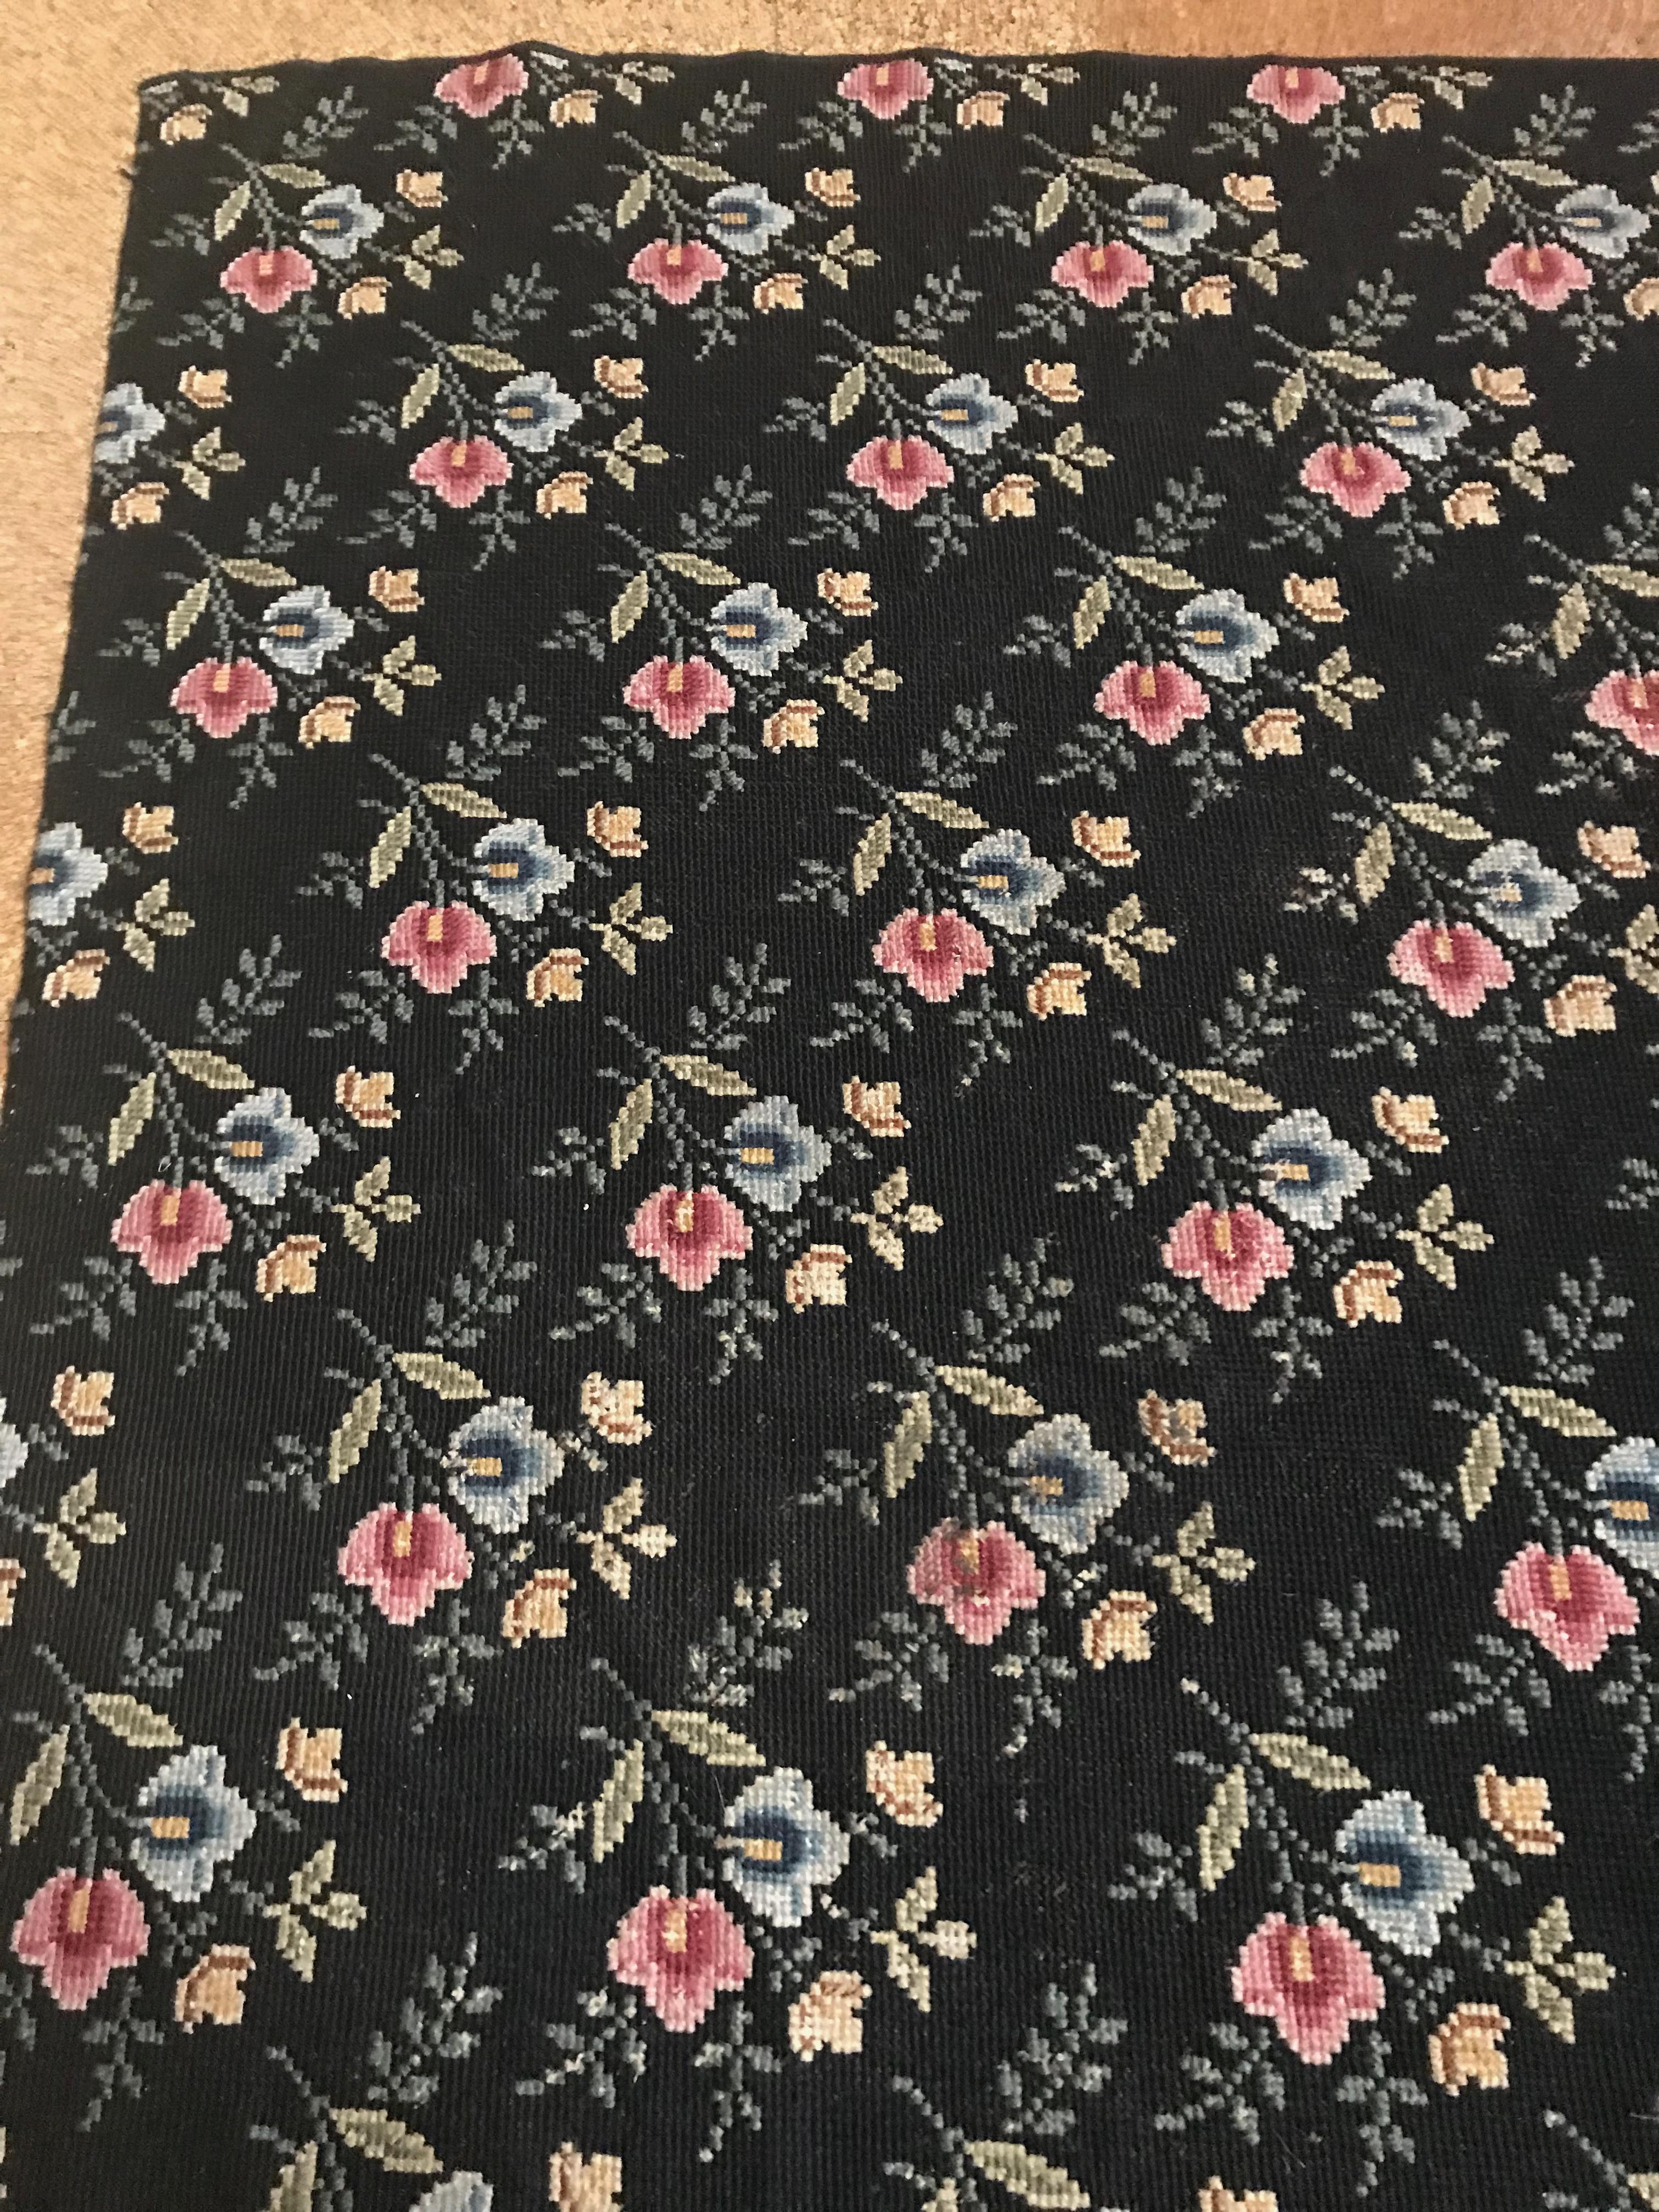 Huge Antique Black French Cross Stitch Wool Carpet Madeleine Castaing For Sale 2